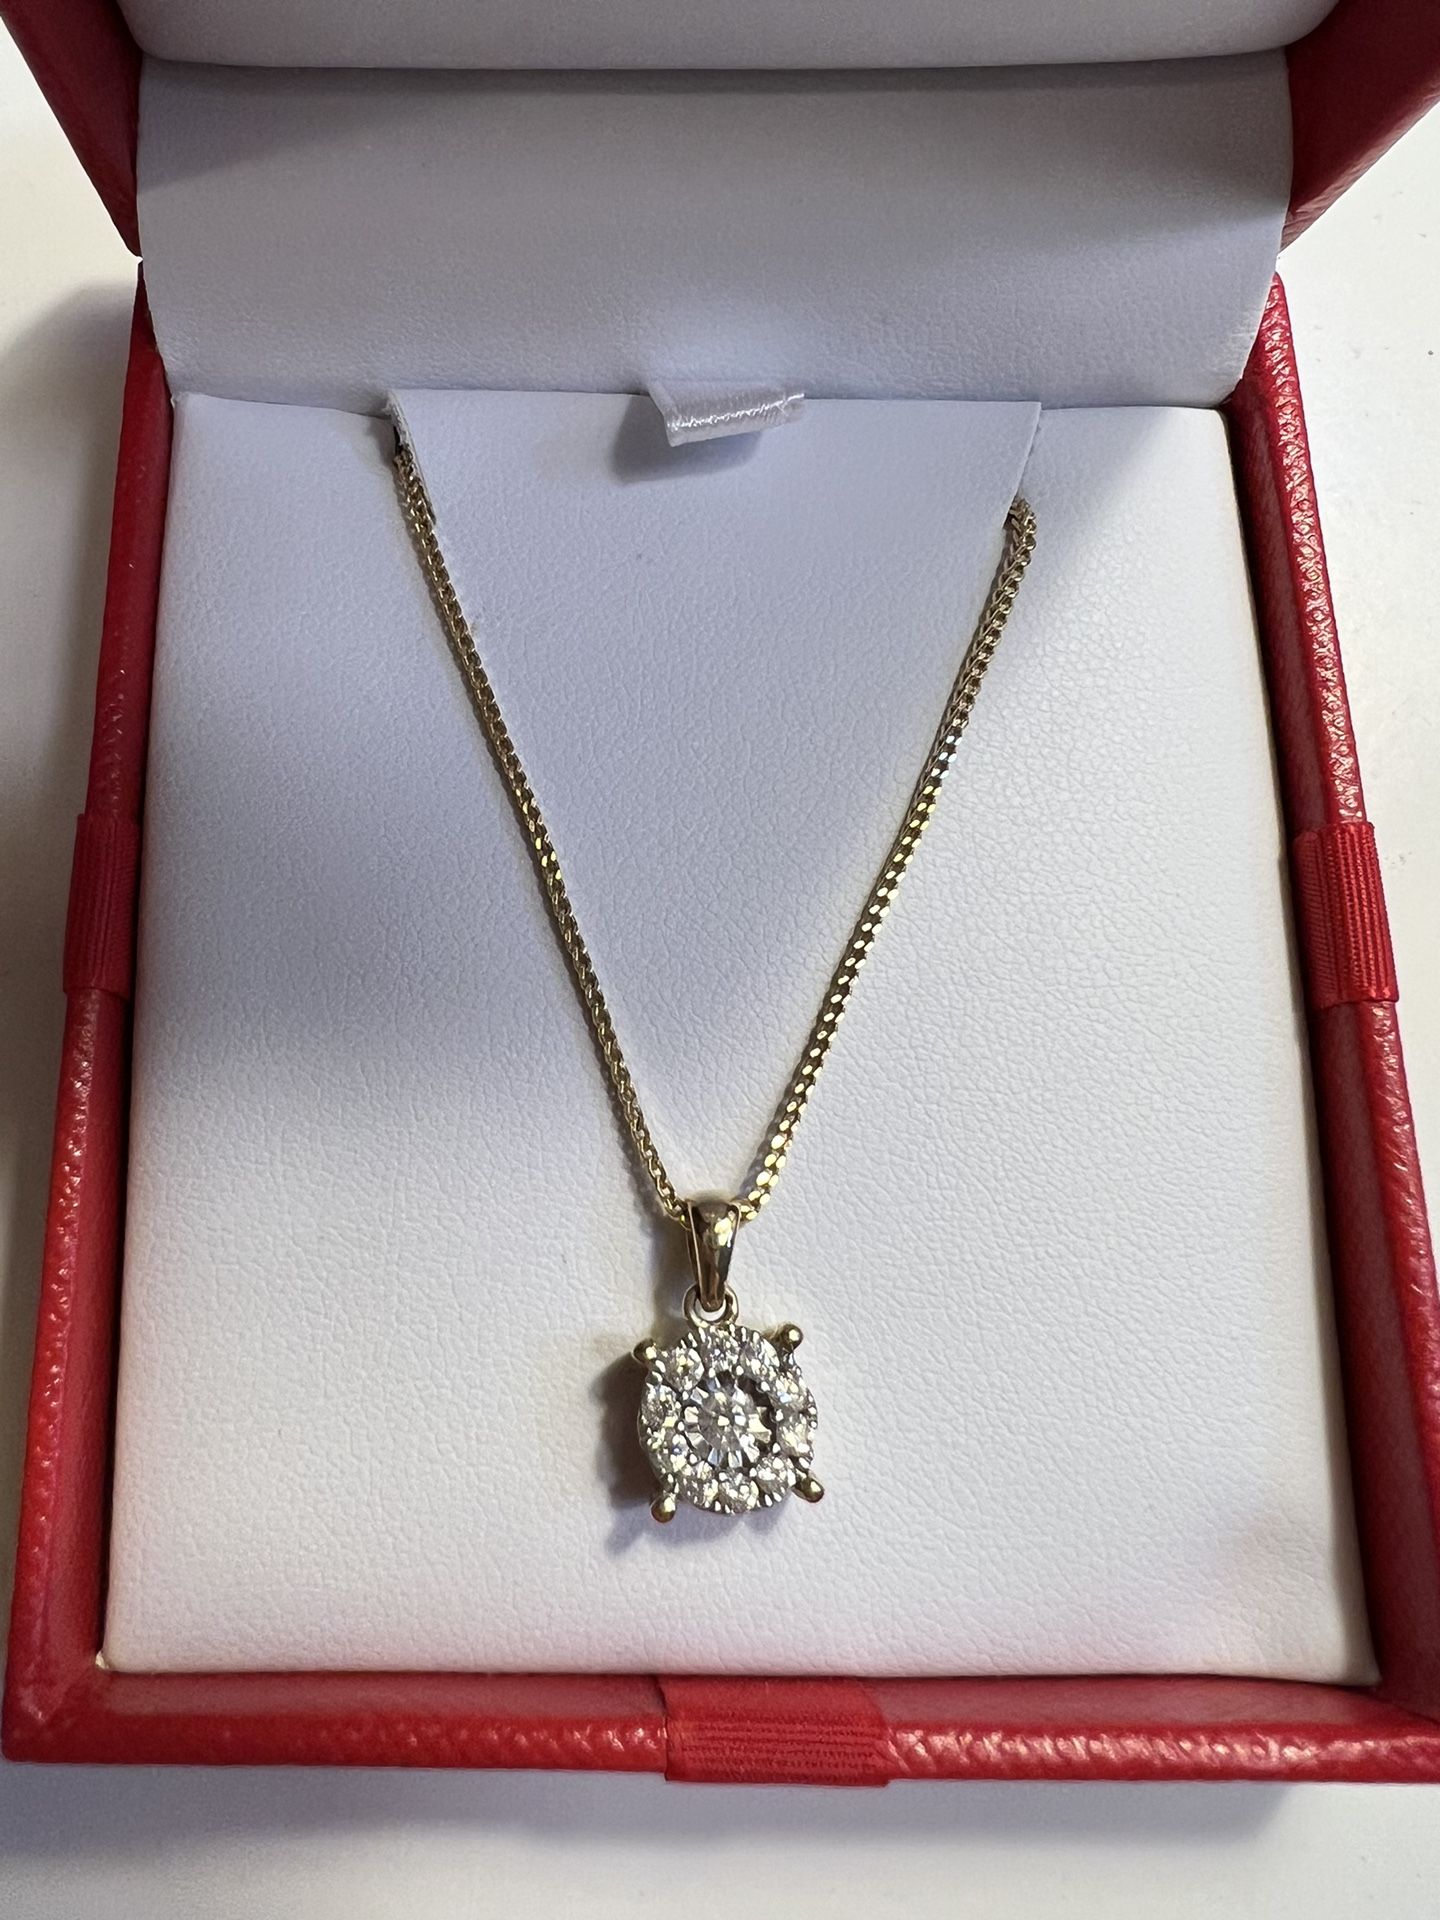 Diamond Necklace With 14k Gold Chain